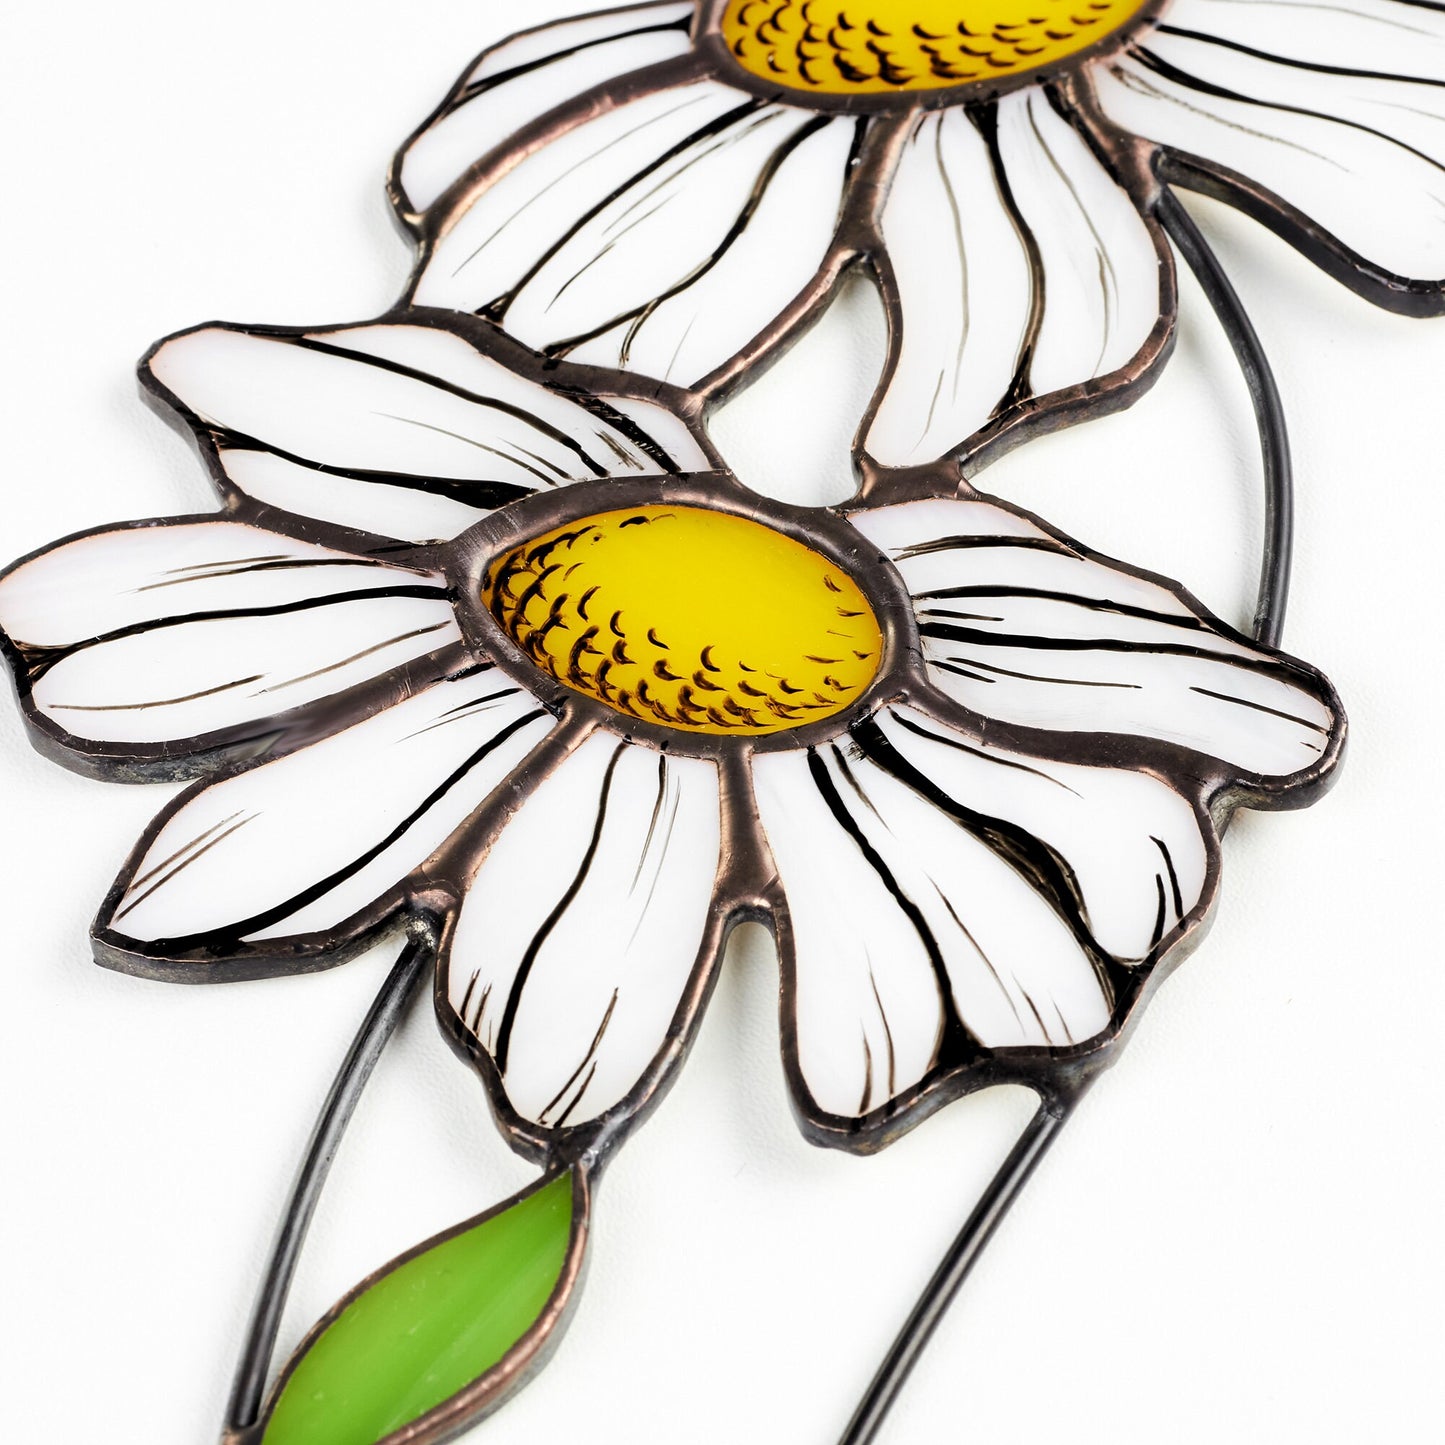 Сhamomile stained glass stake decor